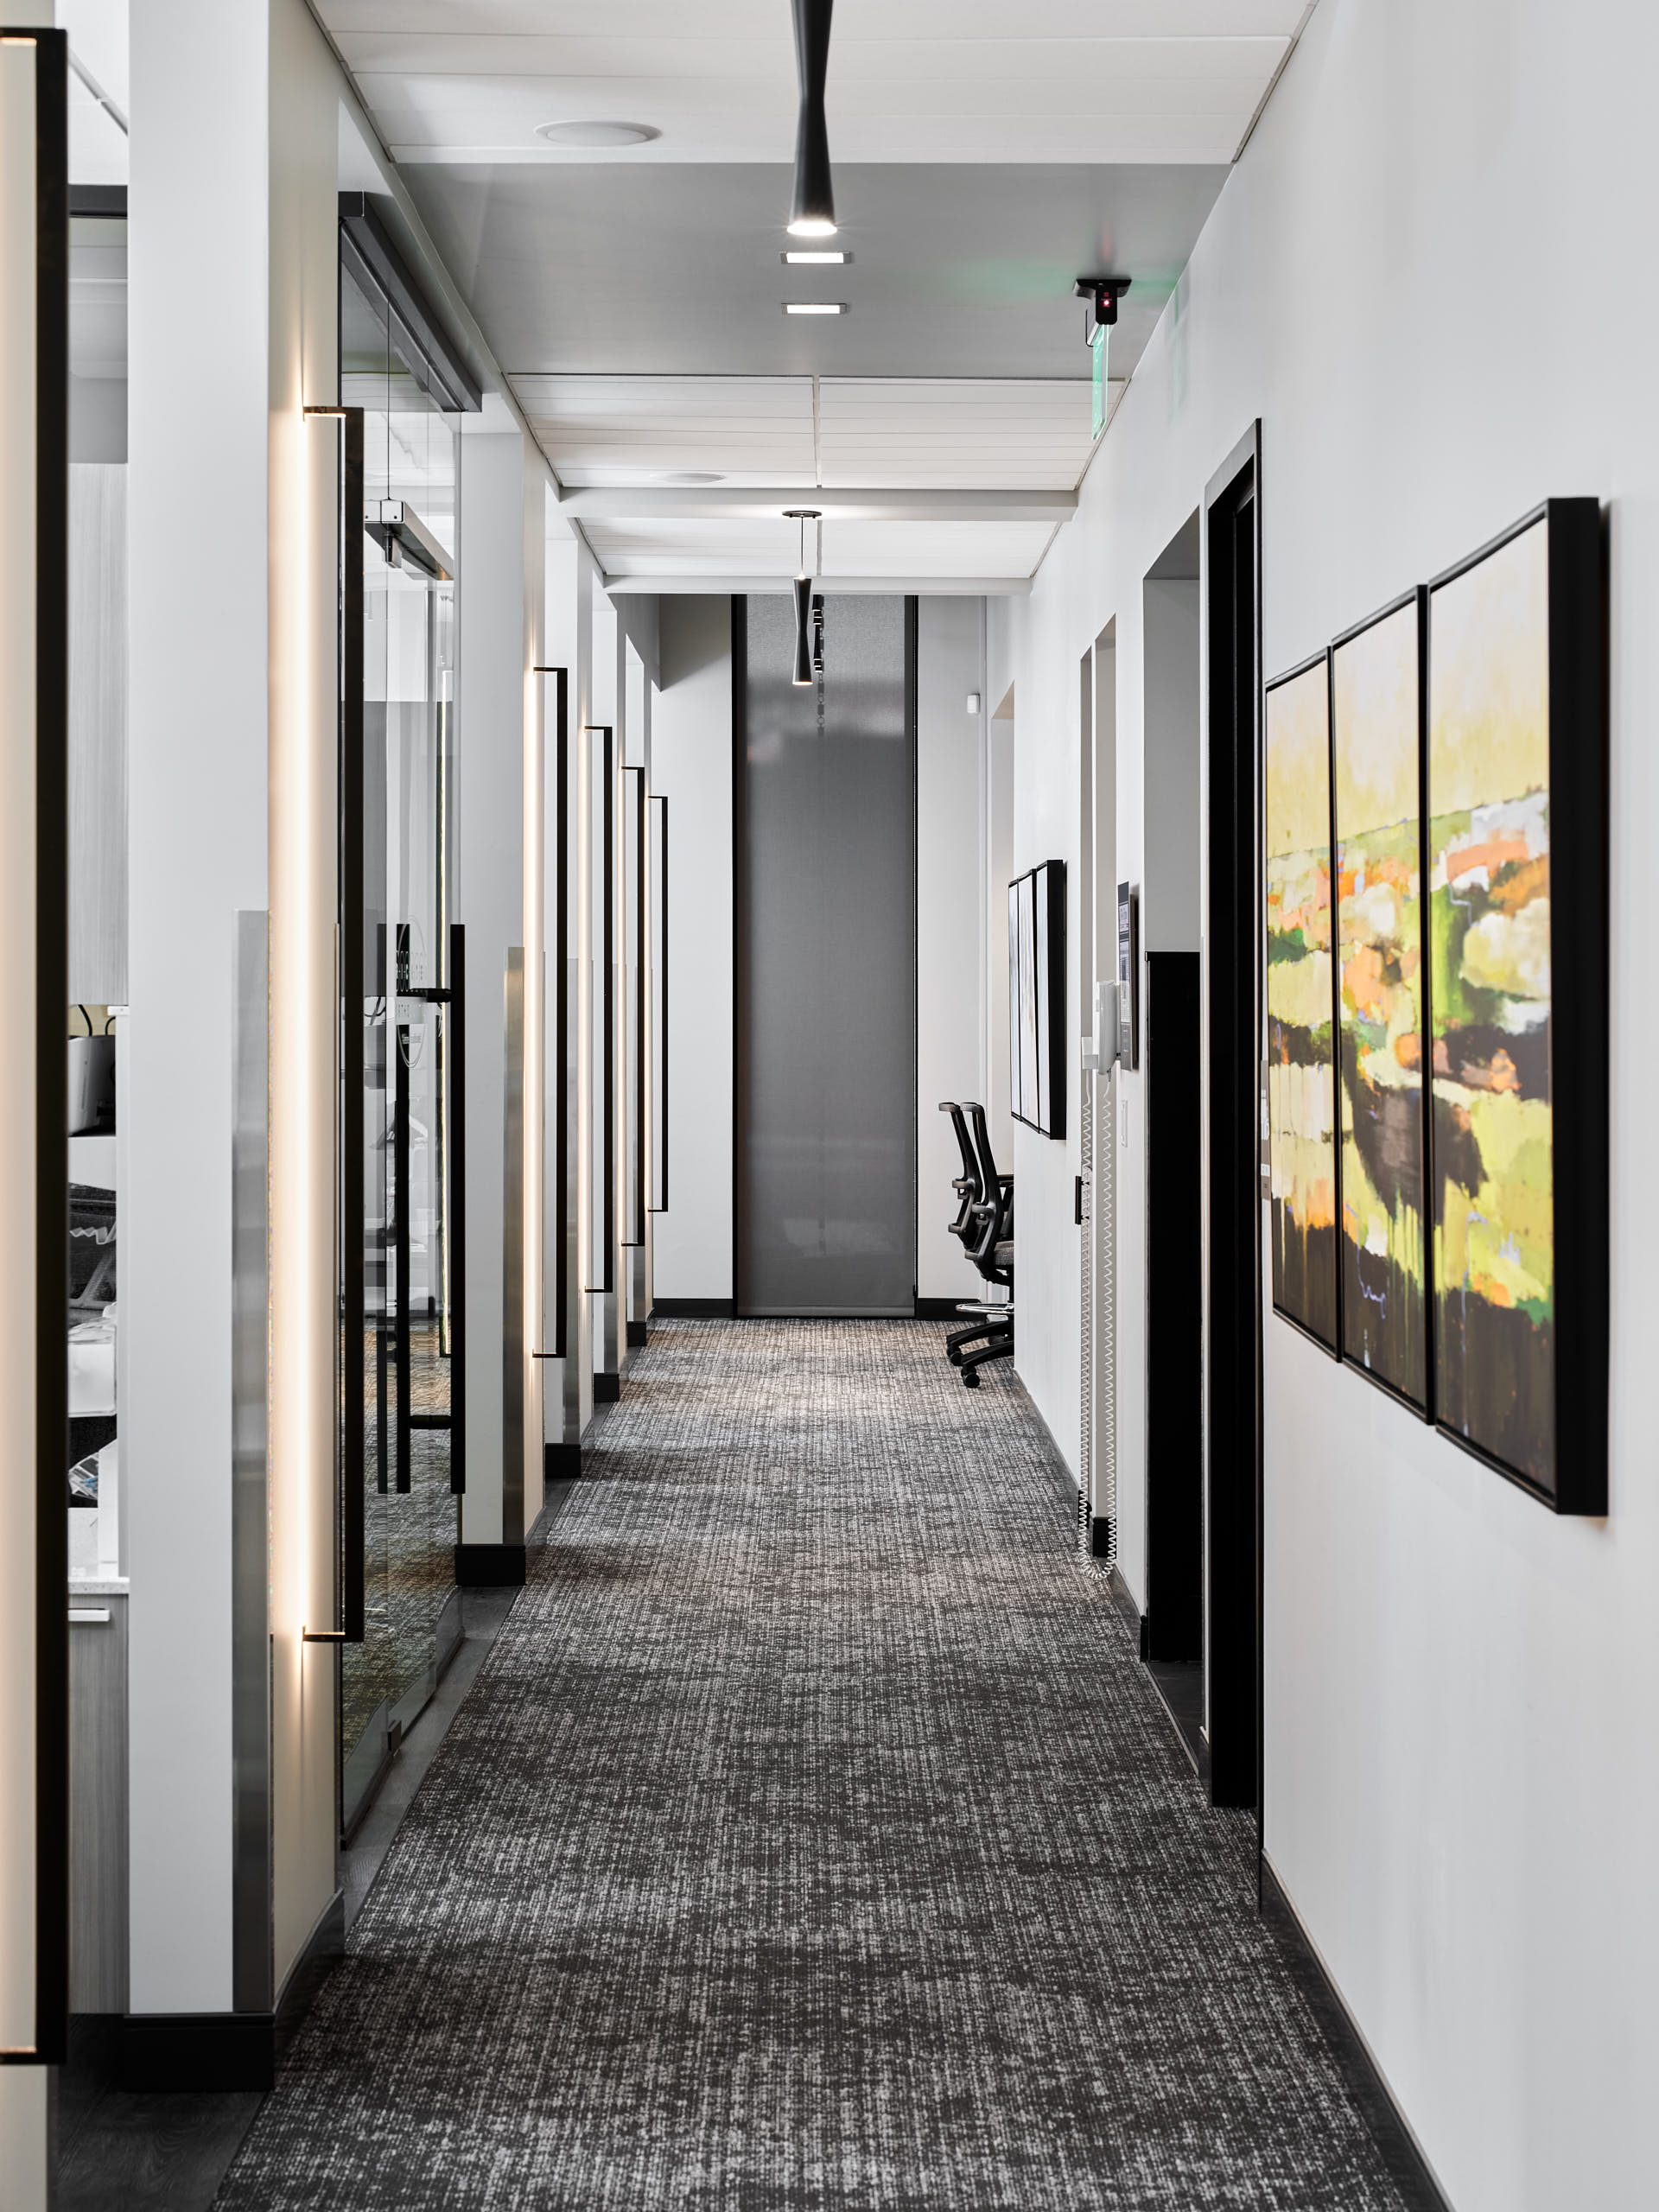 Commercial interior photography by Warren Diggles. 1 point perspective of Richter Orthodontics treatment rooms hallway. Project by Design Ergonomics, VFLA Architects, and Elder Construction.